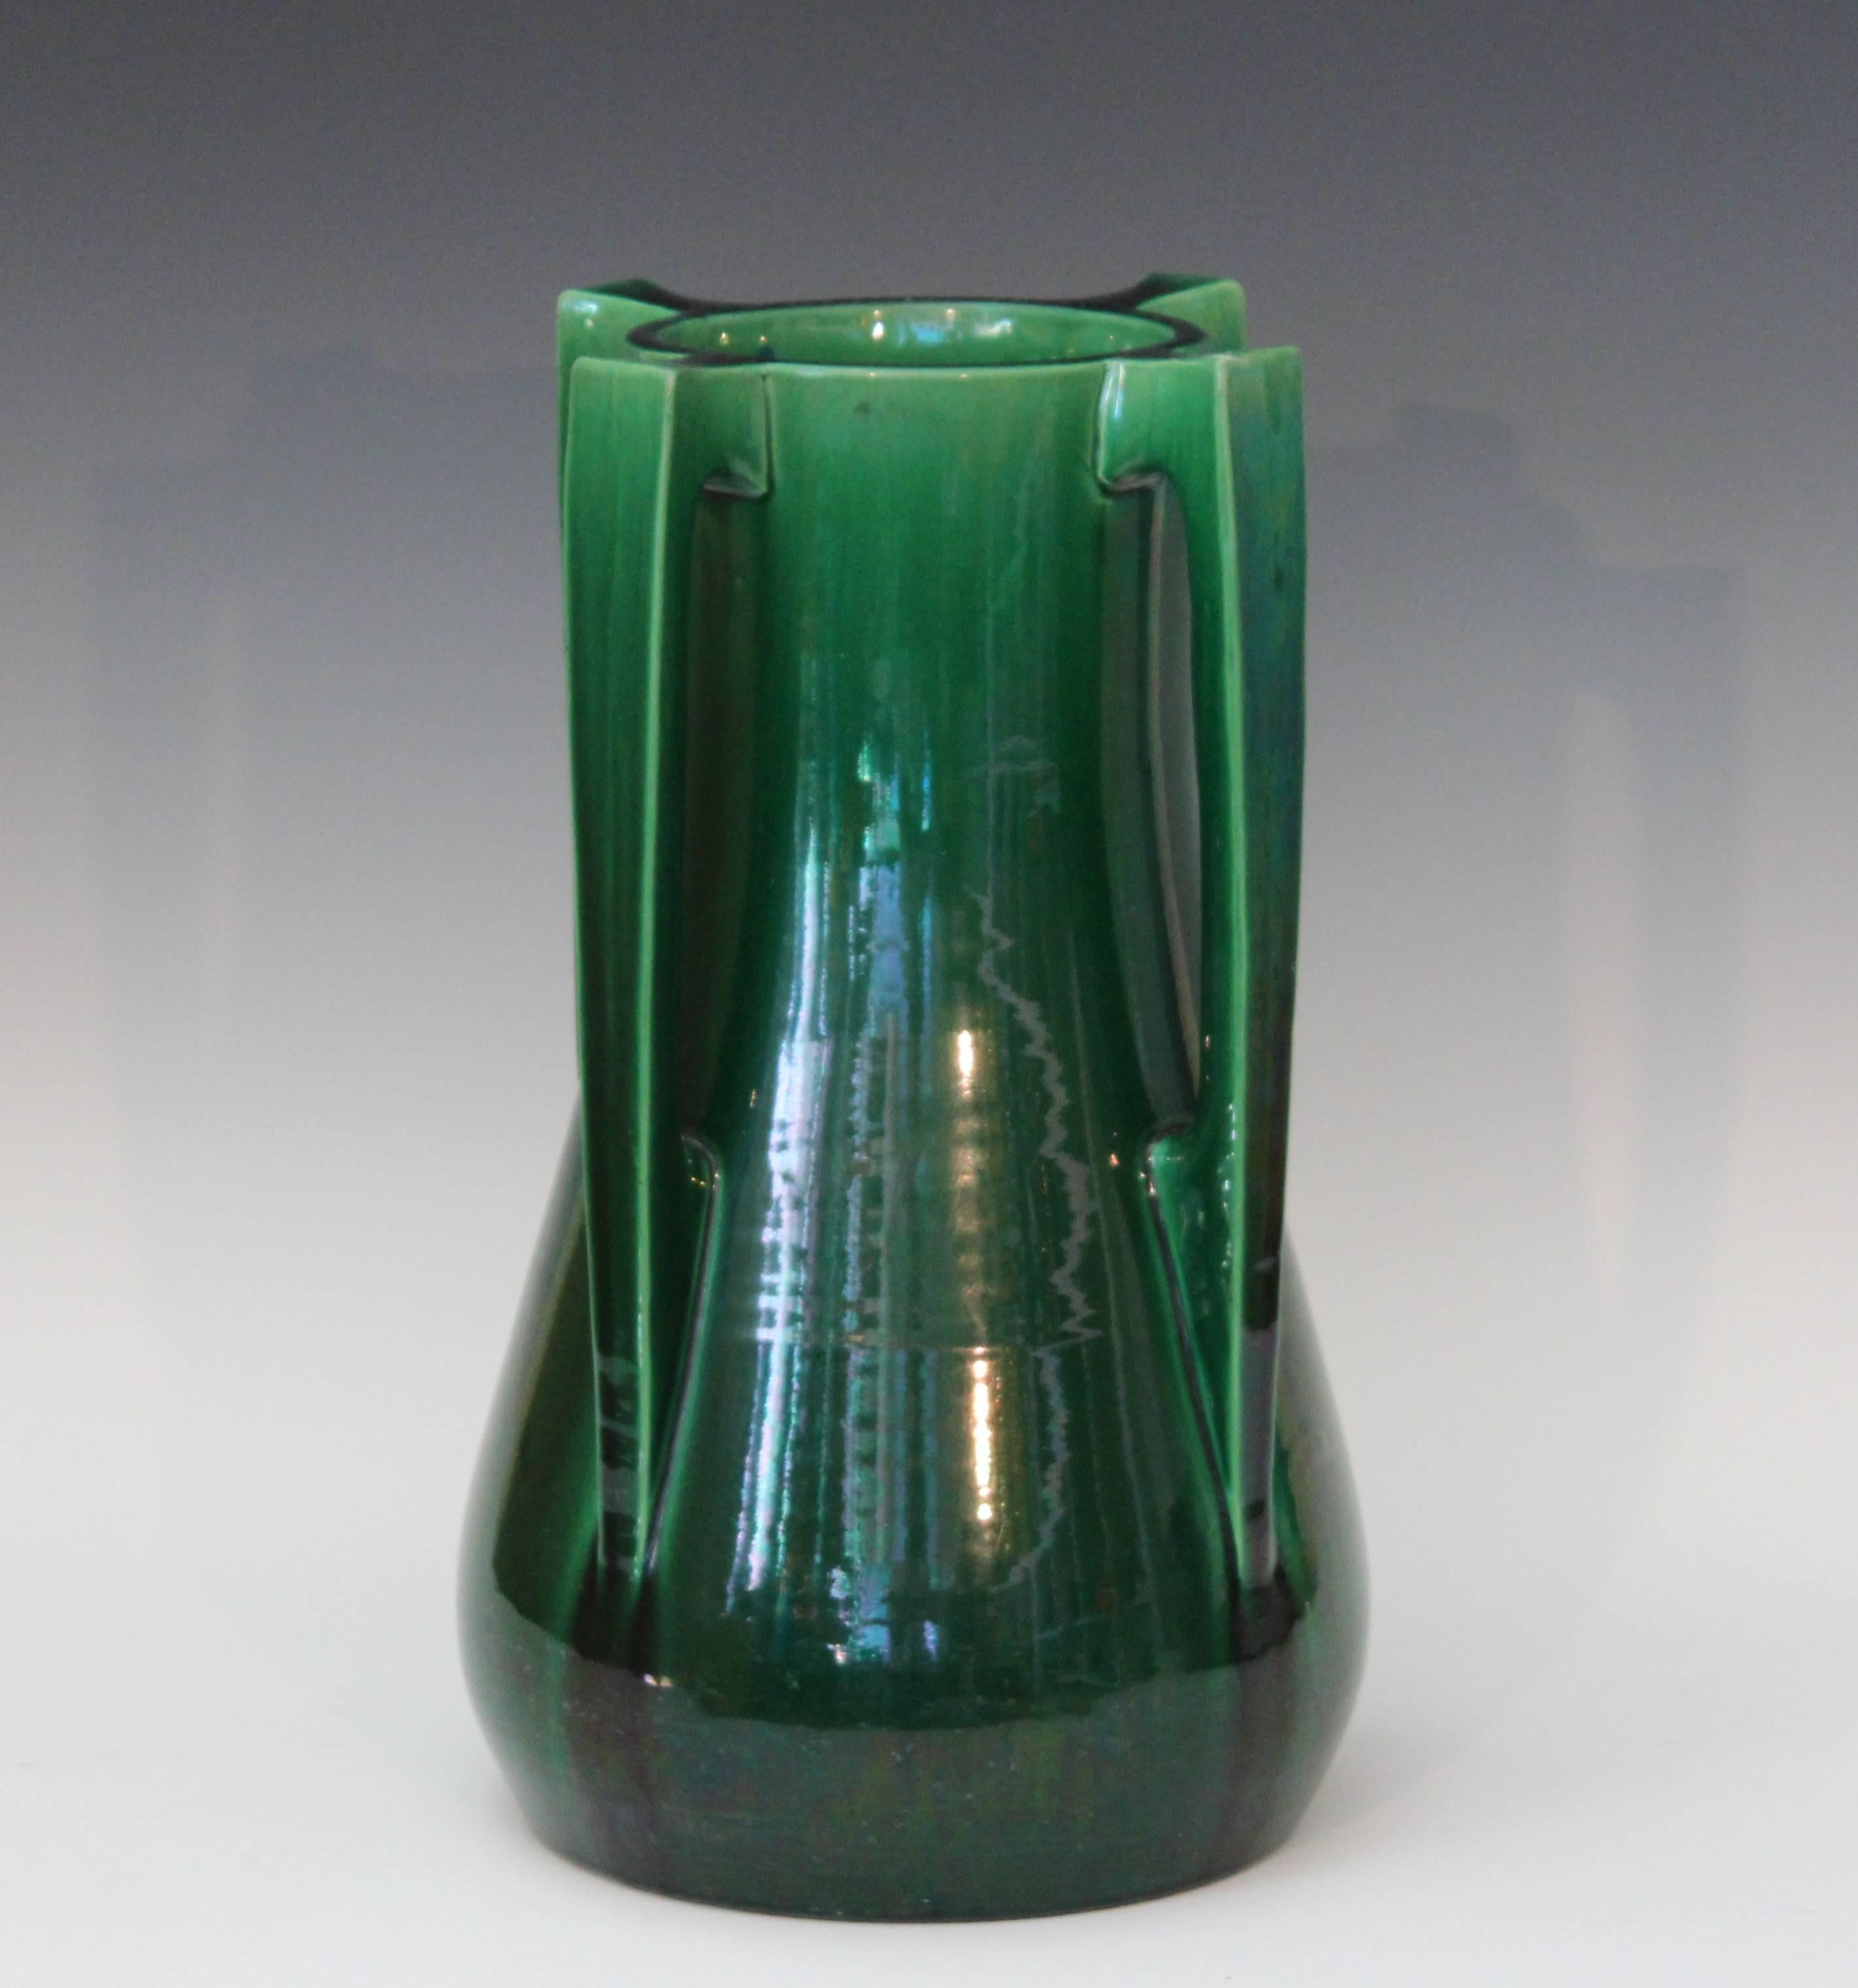 Sleek Awaji vase in terrific architectural form with four applied buttress handles and deep green monochrome glaze, circa 1920s. Measures: 15 1/2